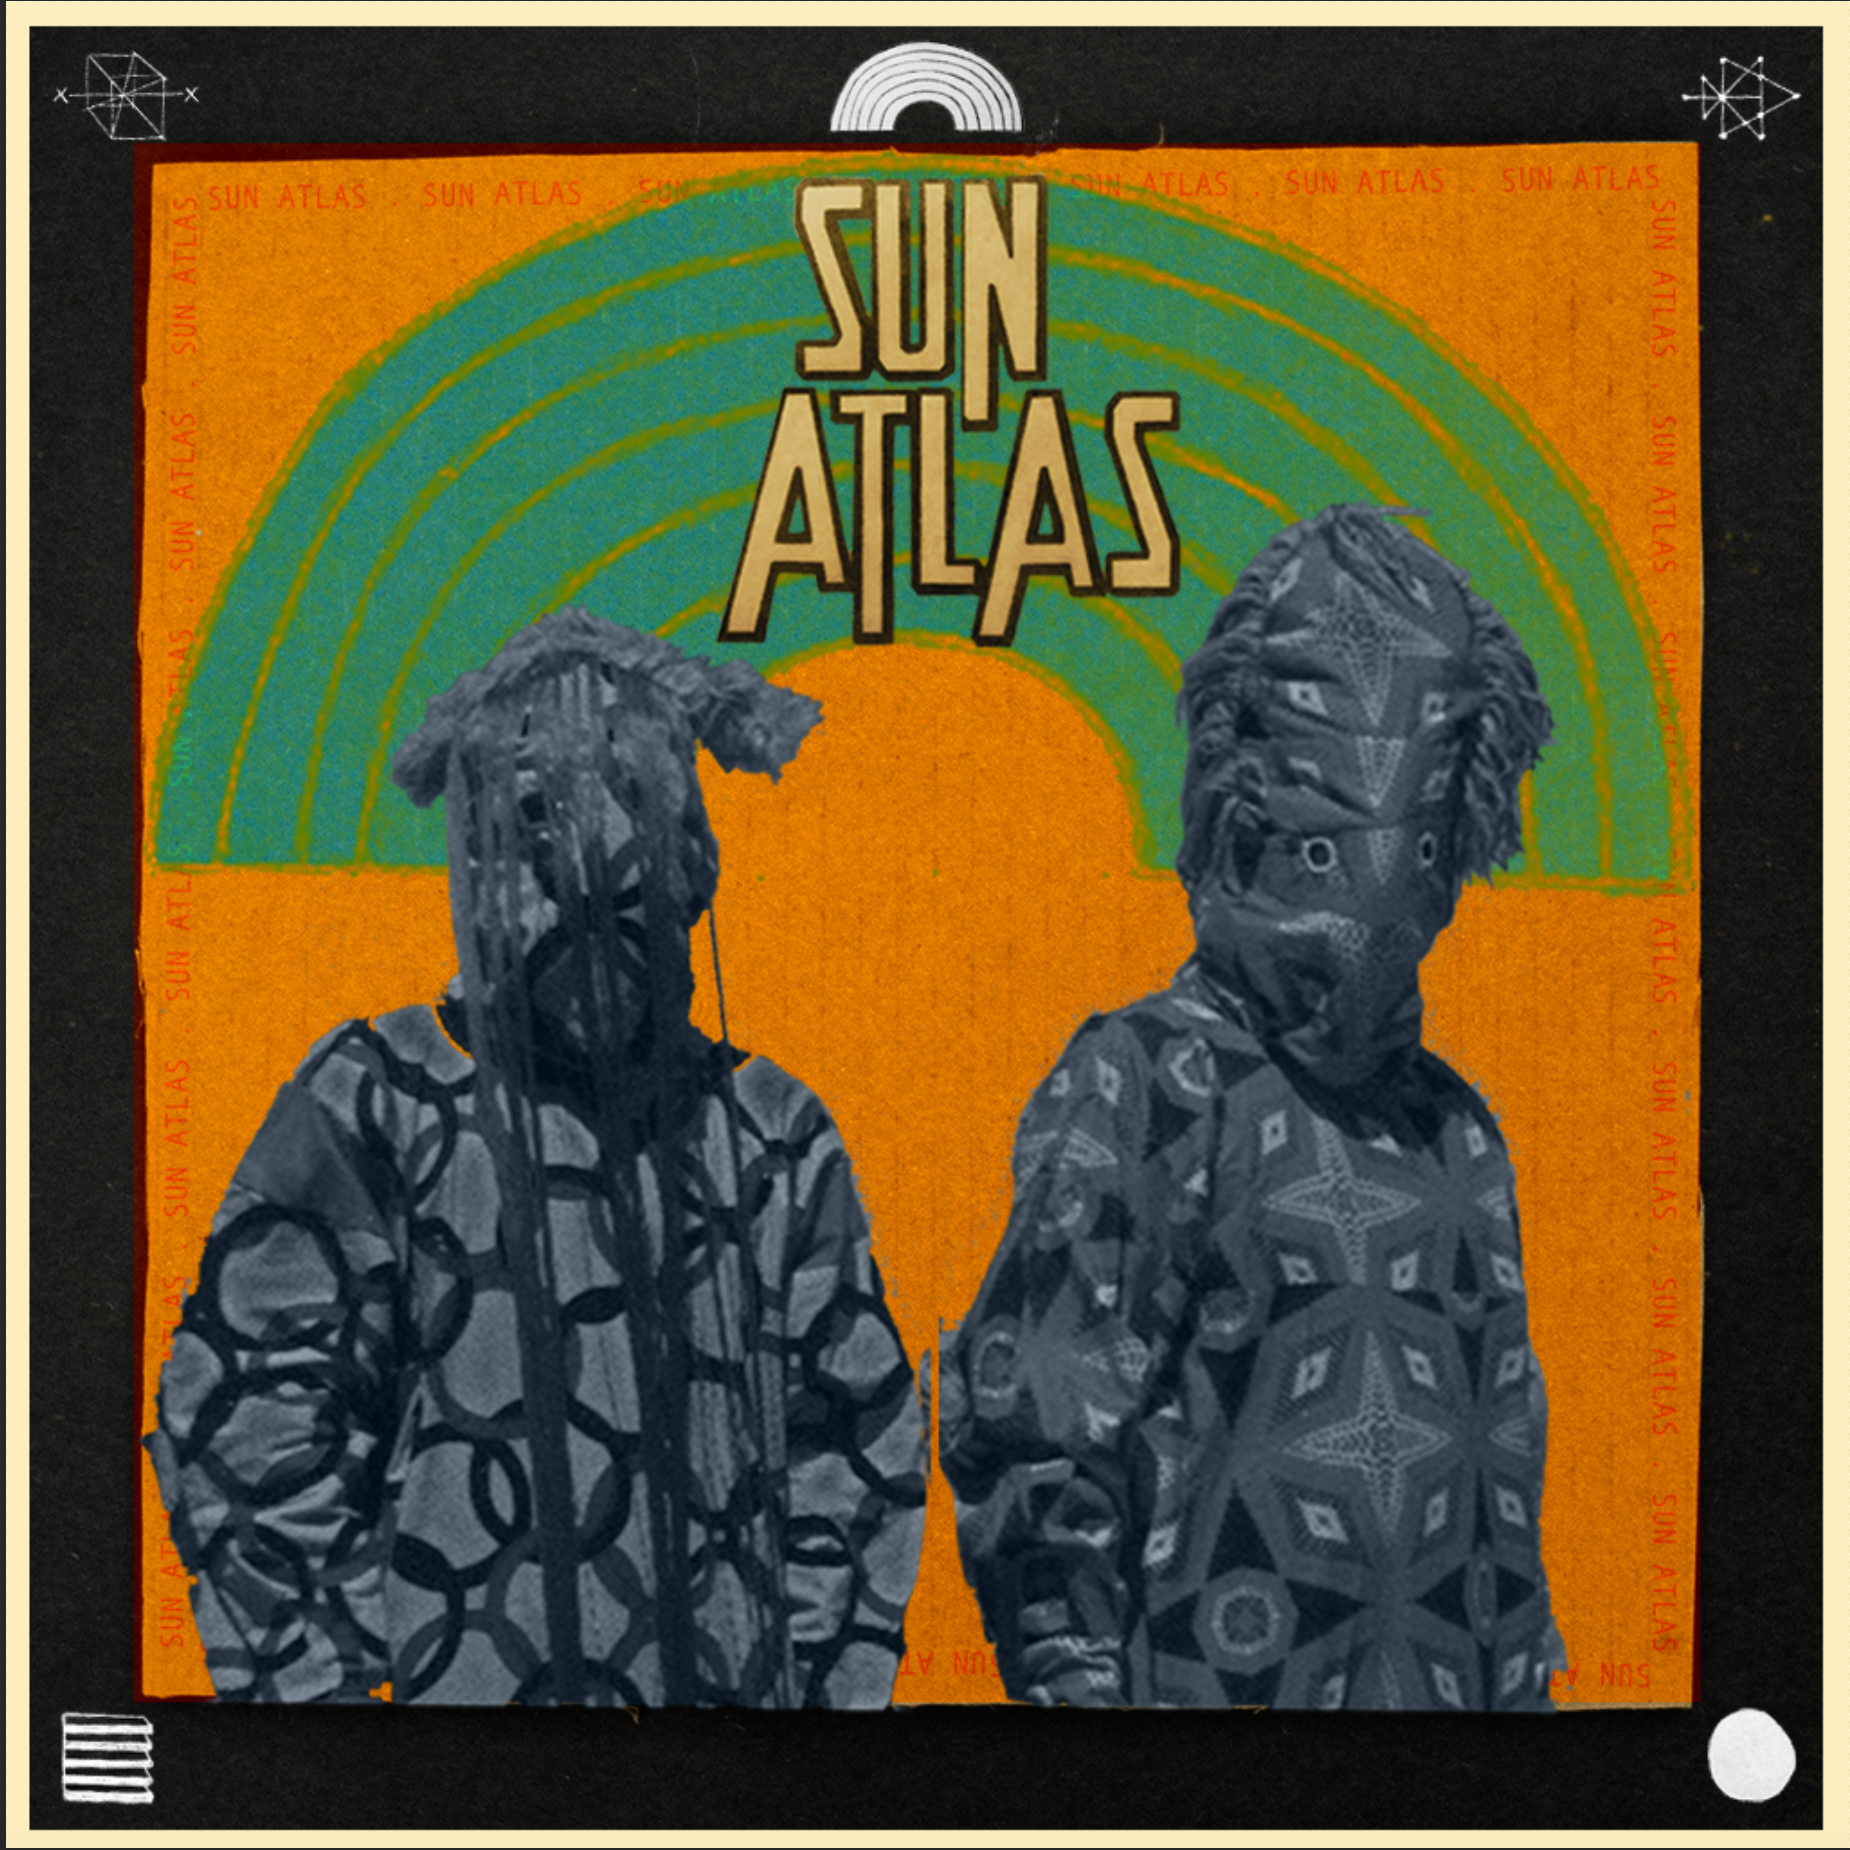 Mysterious Sun Atlas Re-Release Hit Single And Drop New Album